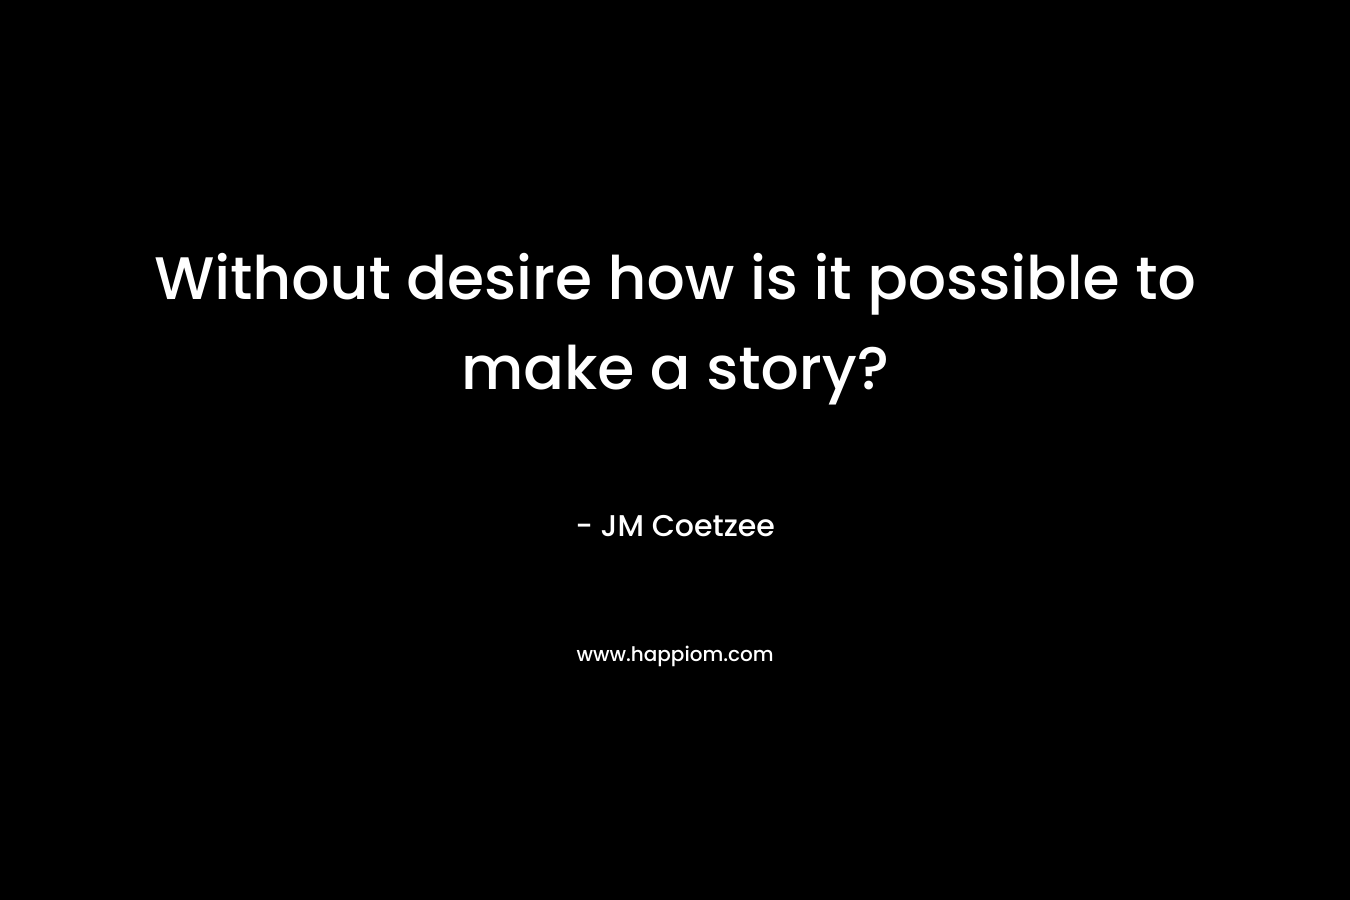 Without desire how is it possible to make a story?